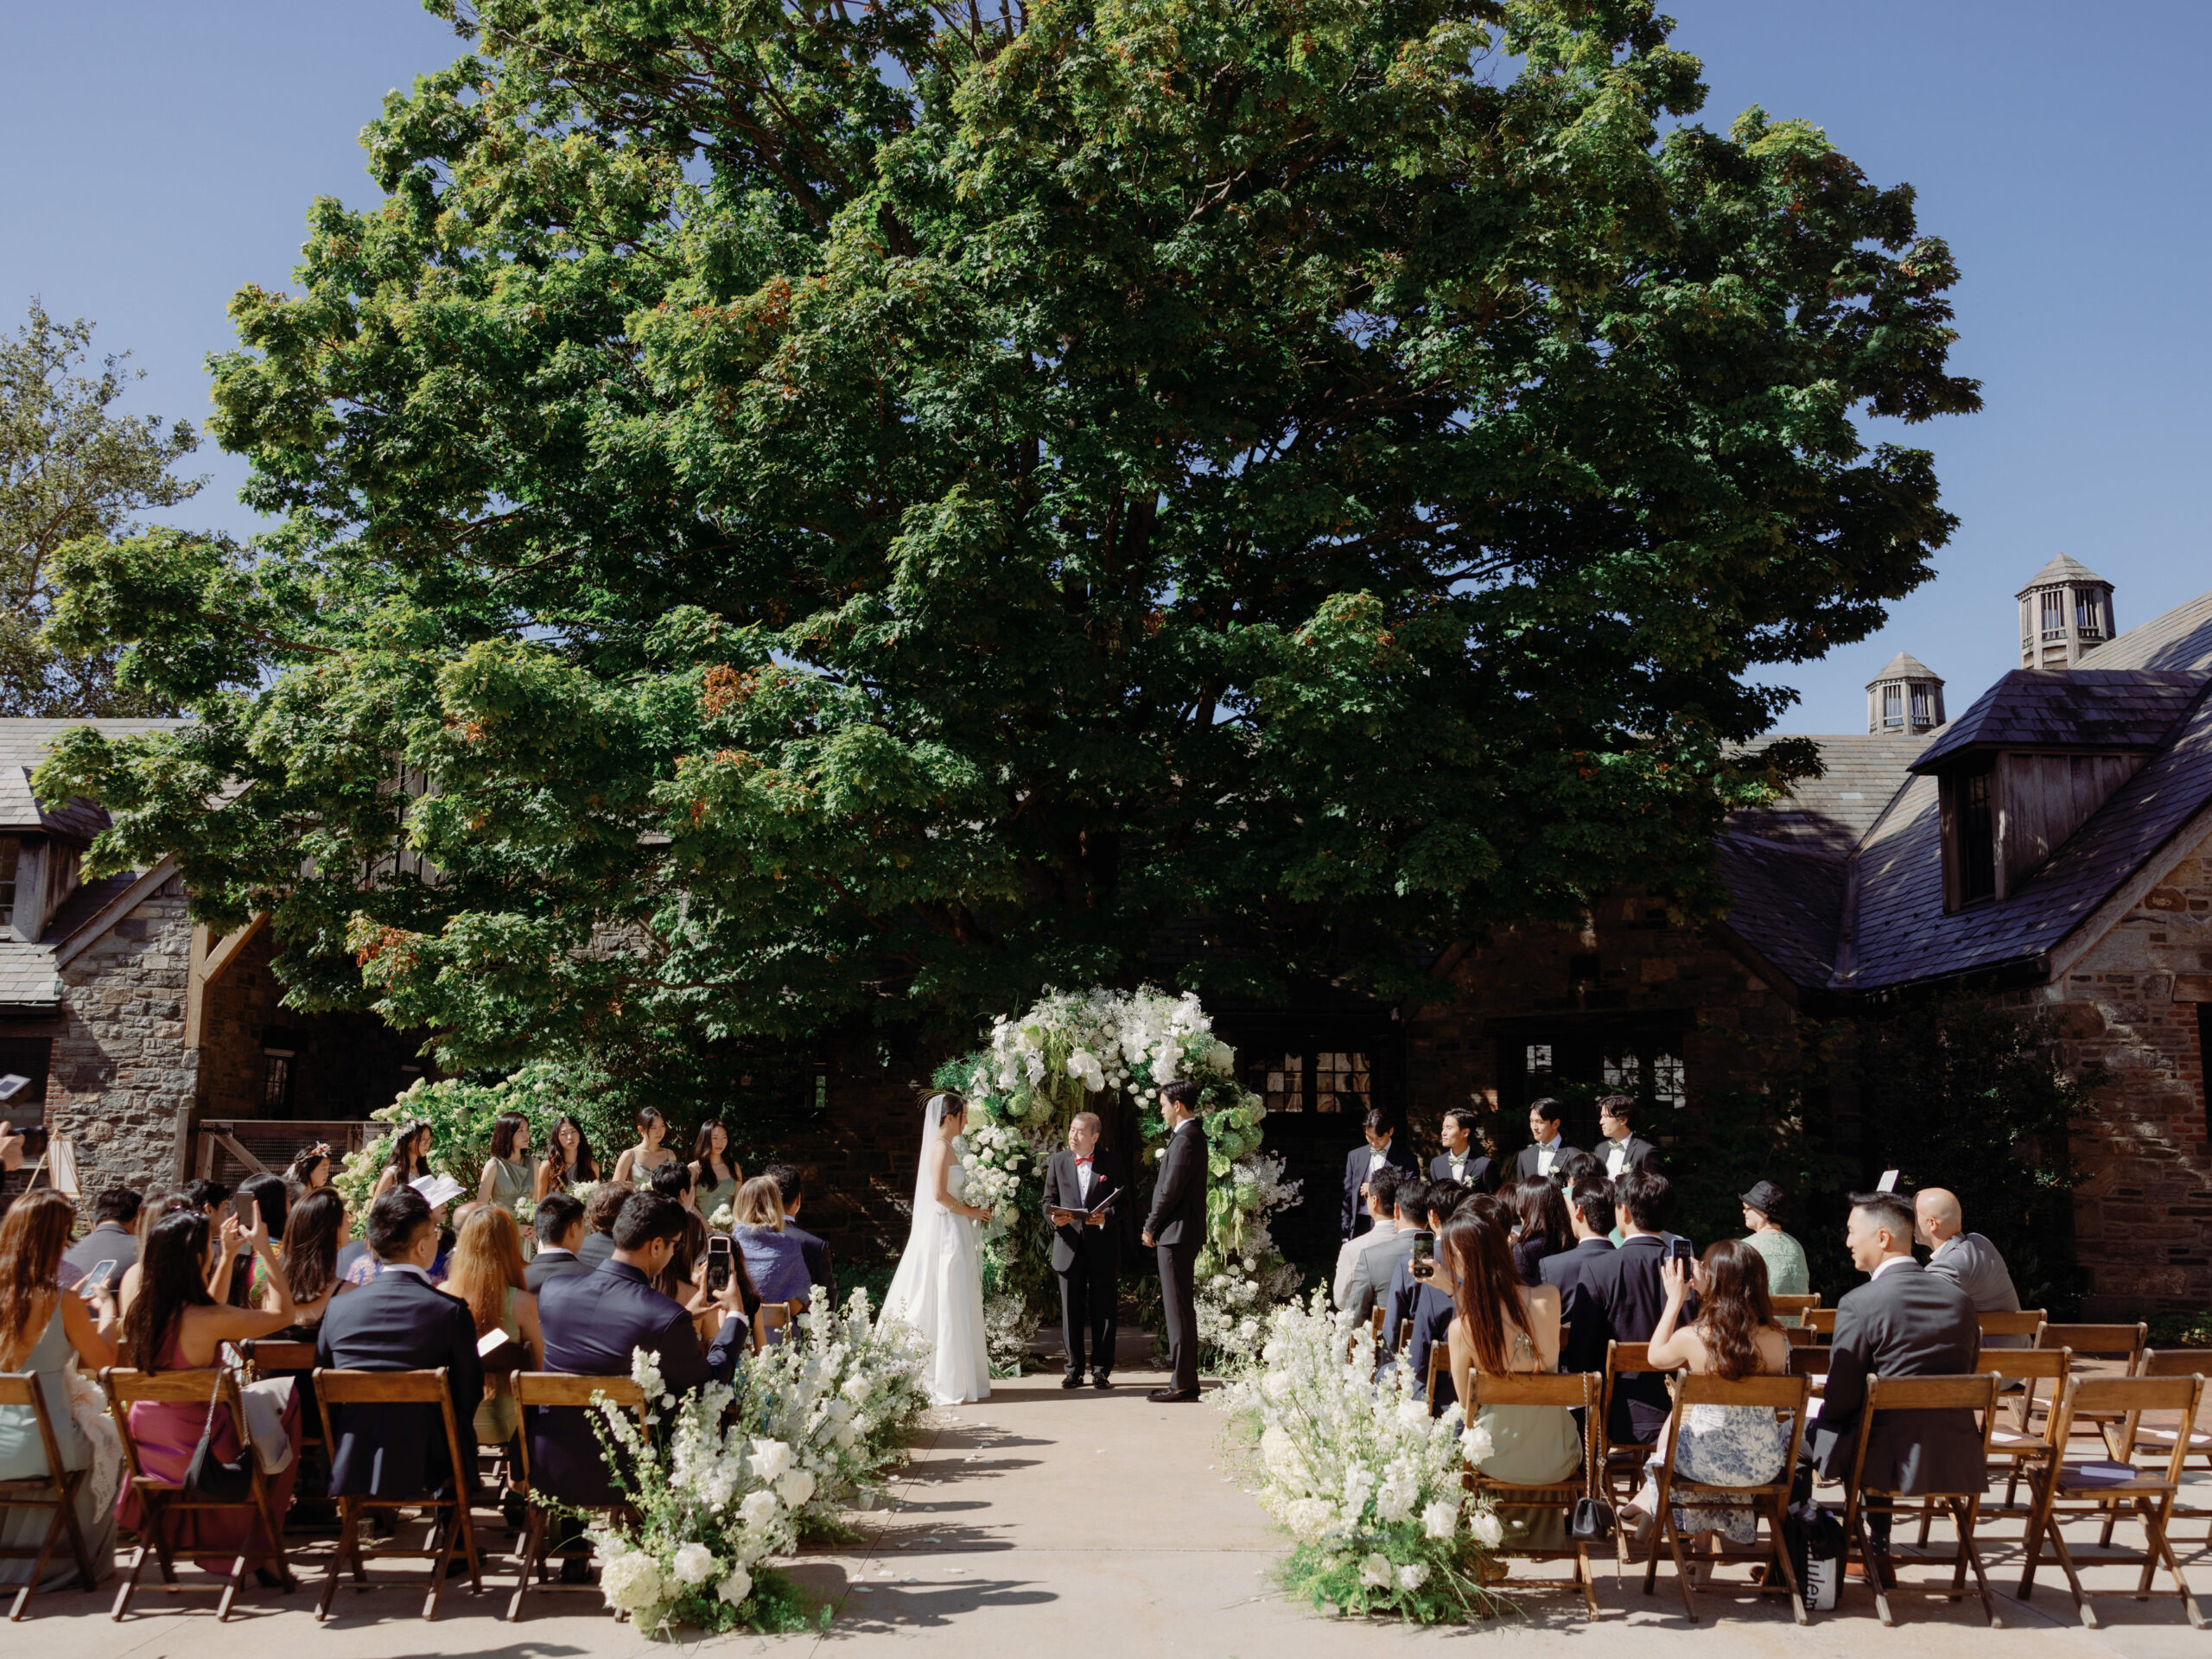 An outdoor wedding ceremony image at Blue Hill at Stone Barns, NY. Candid wedding photography image by Jenny Fu Studio